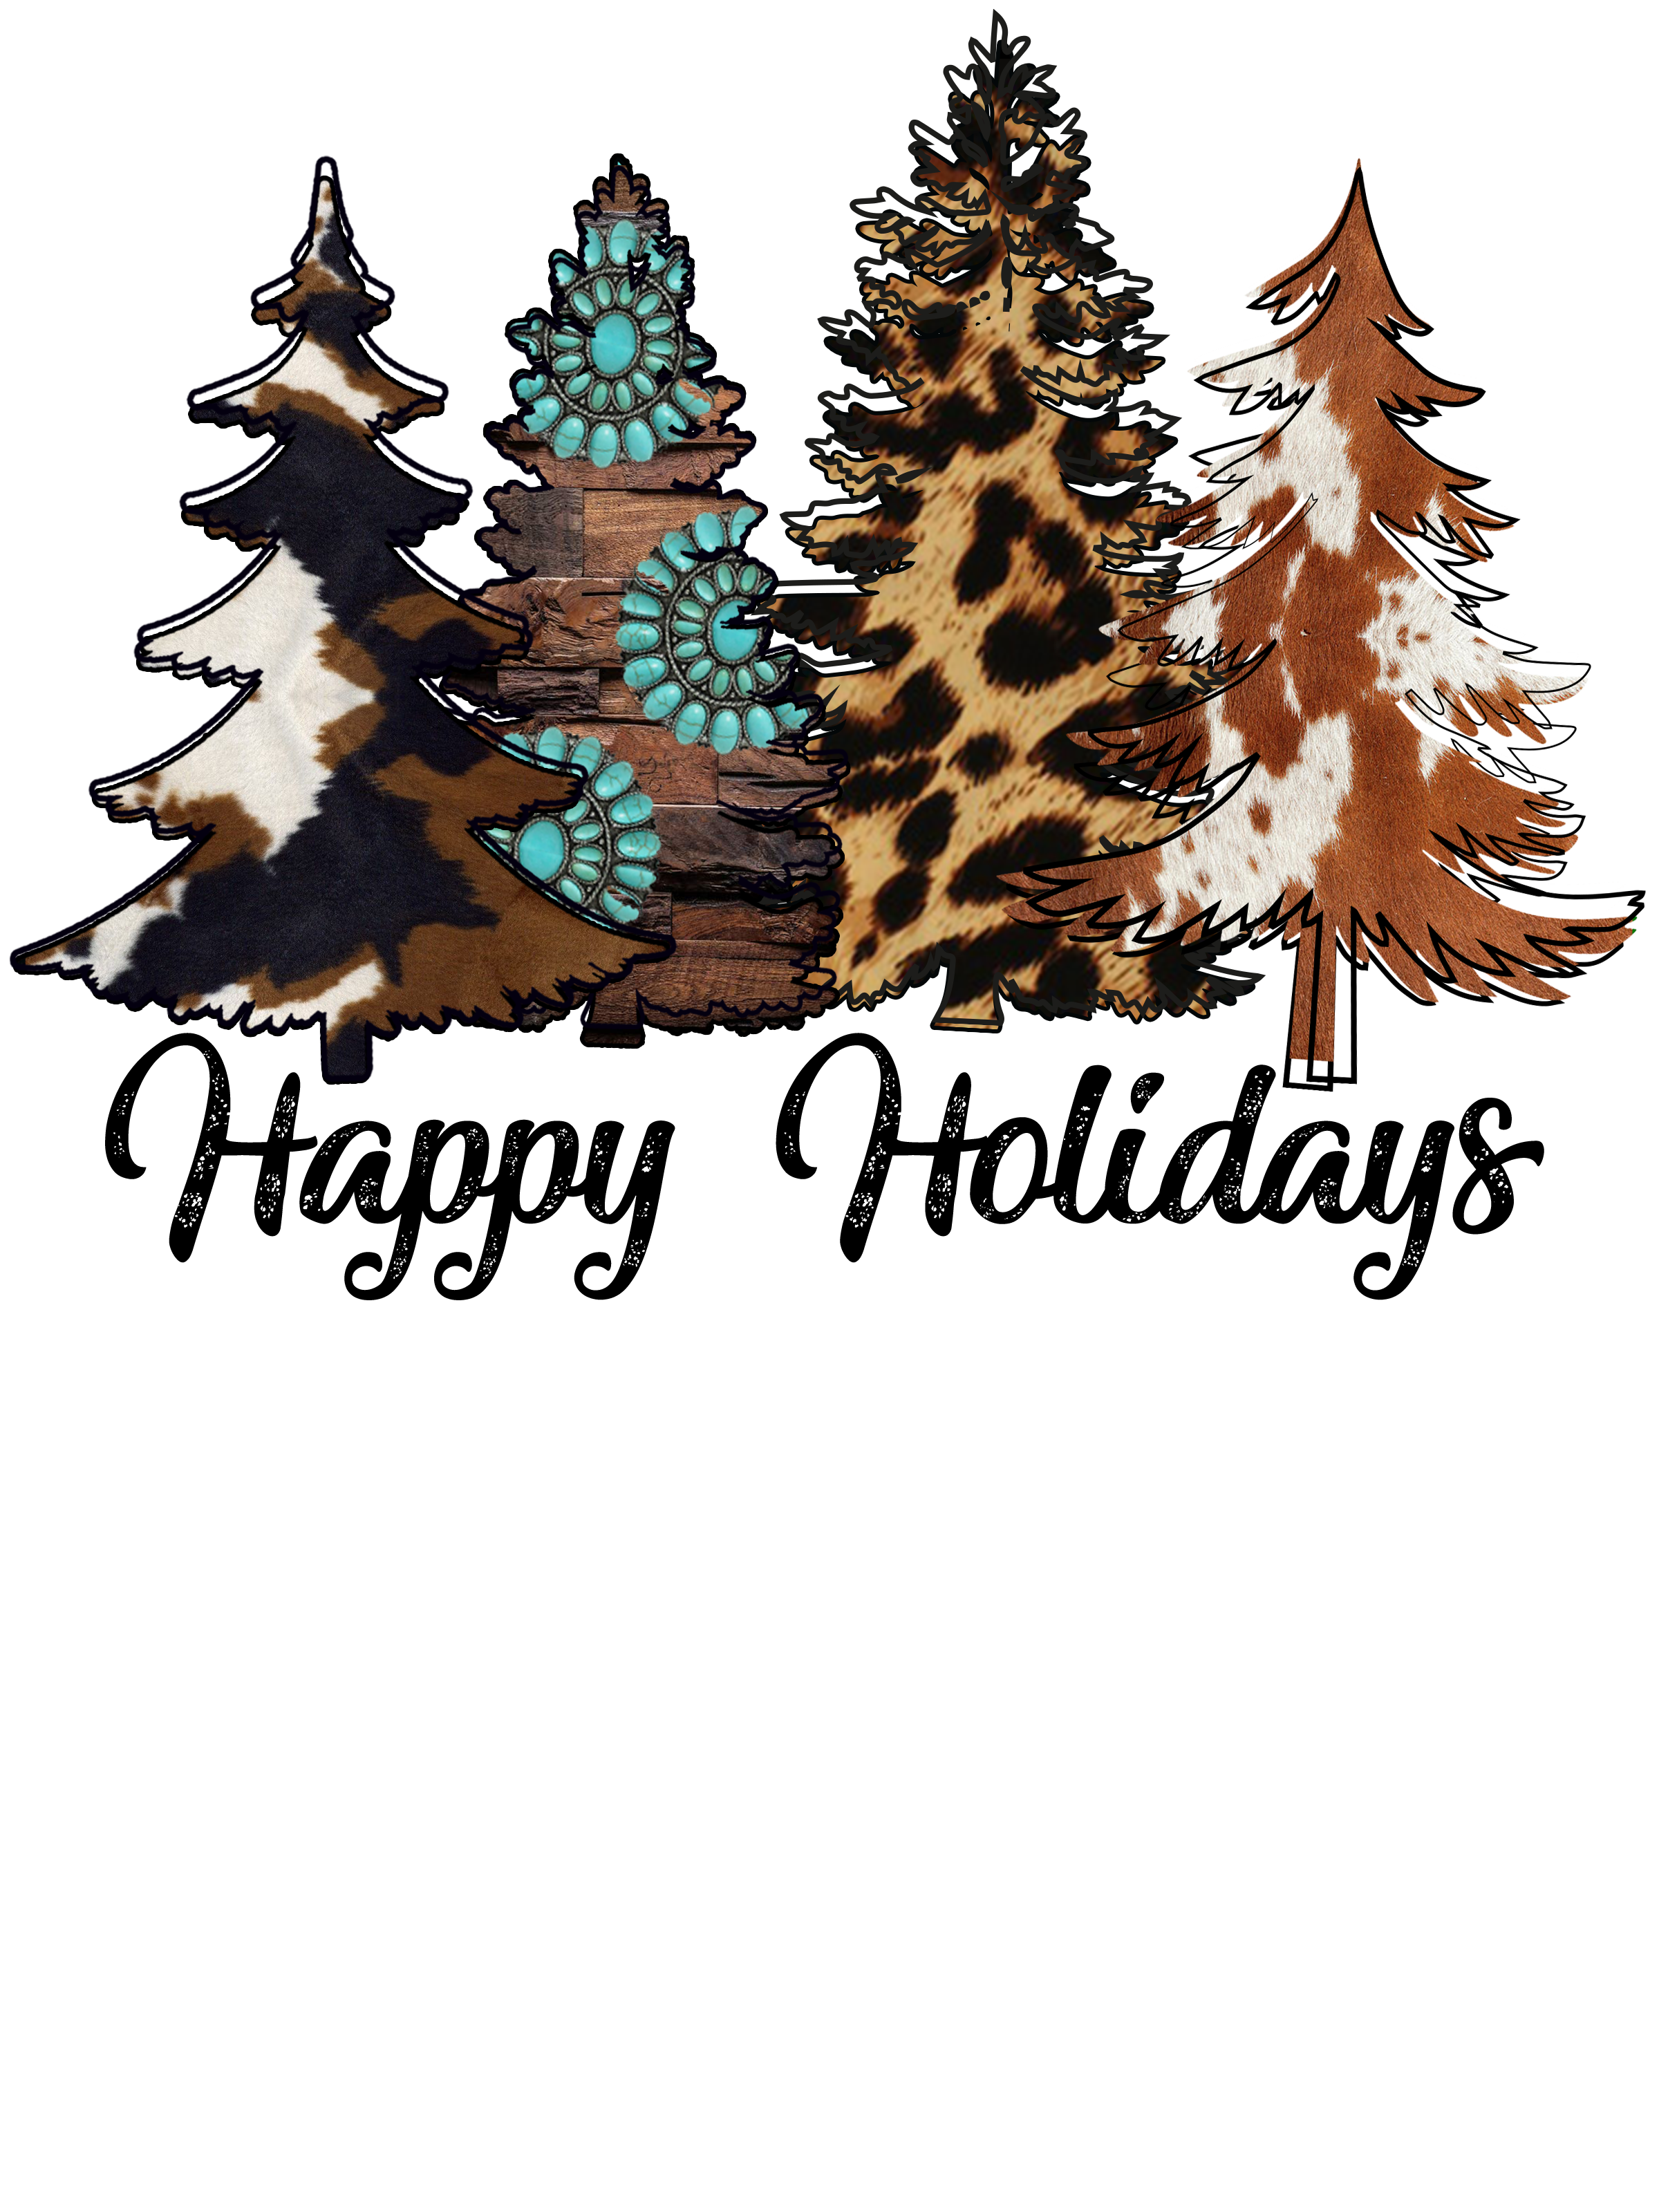 Sublimation Prints -Western Christmas Trees - The Vinyl Haus